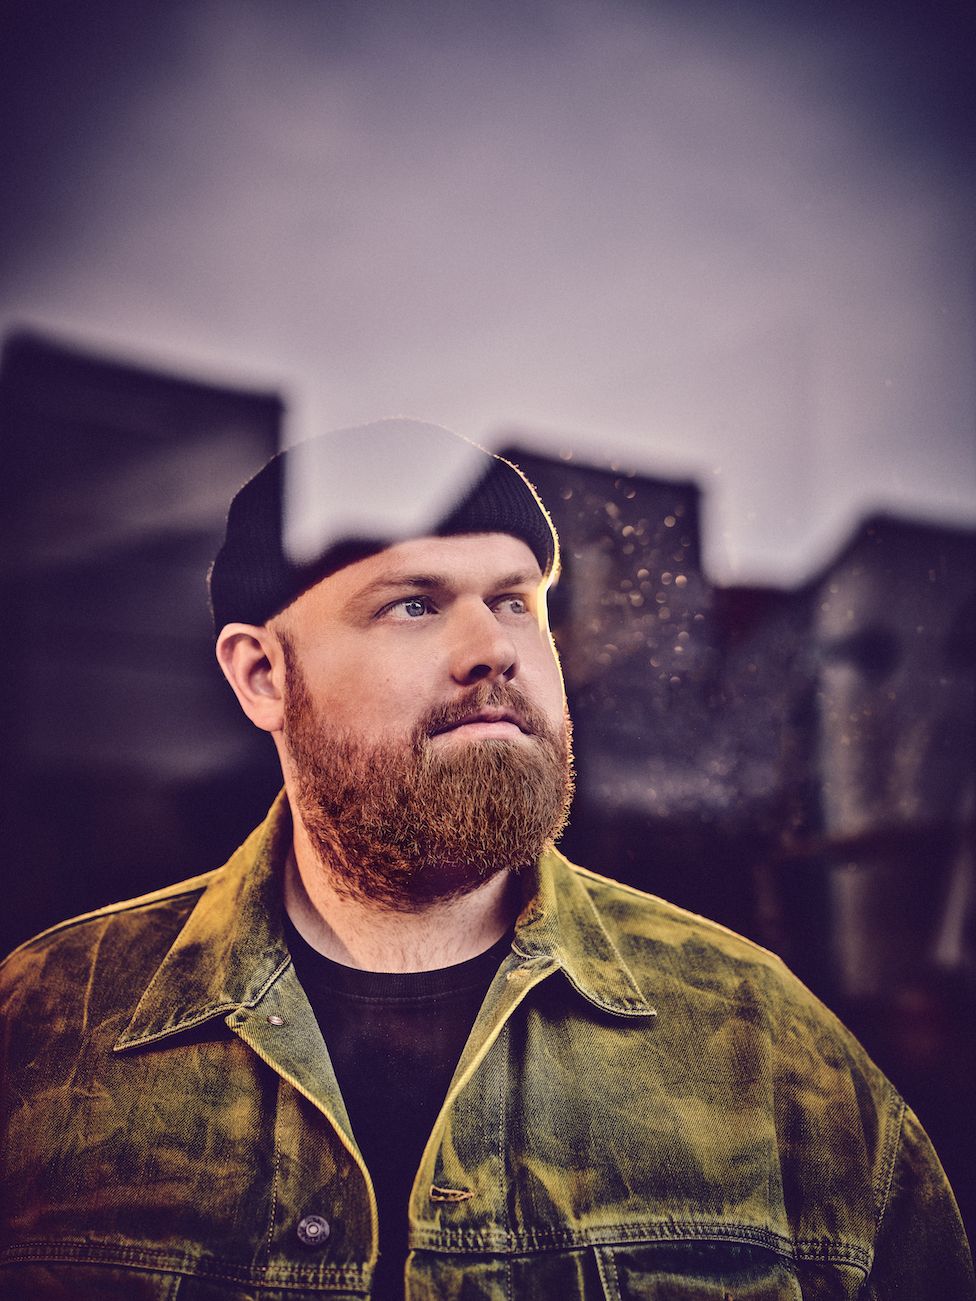 Tom Walker in a promotional photograph for his second album, I Am